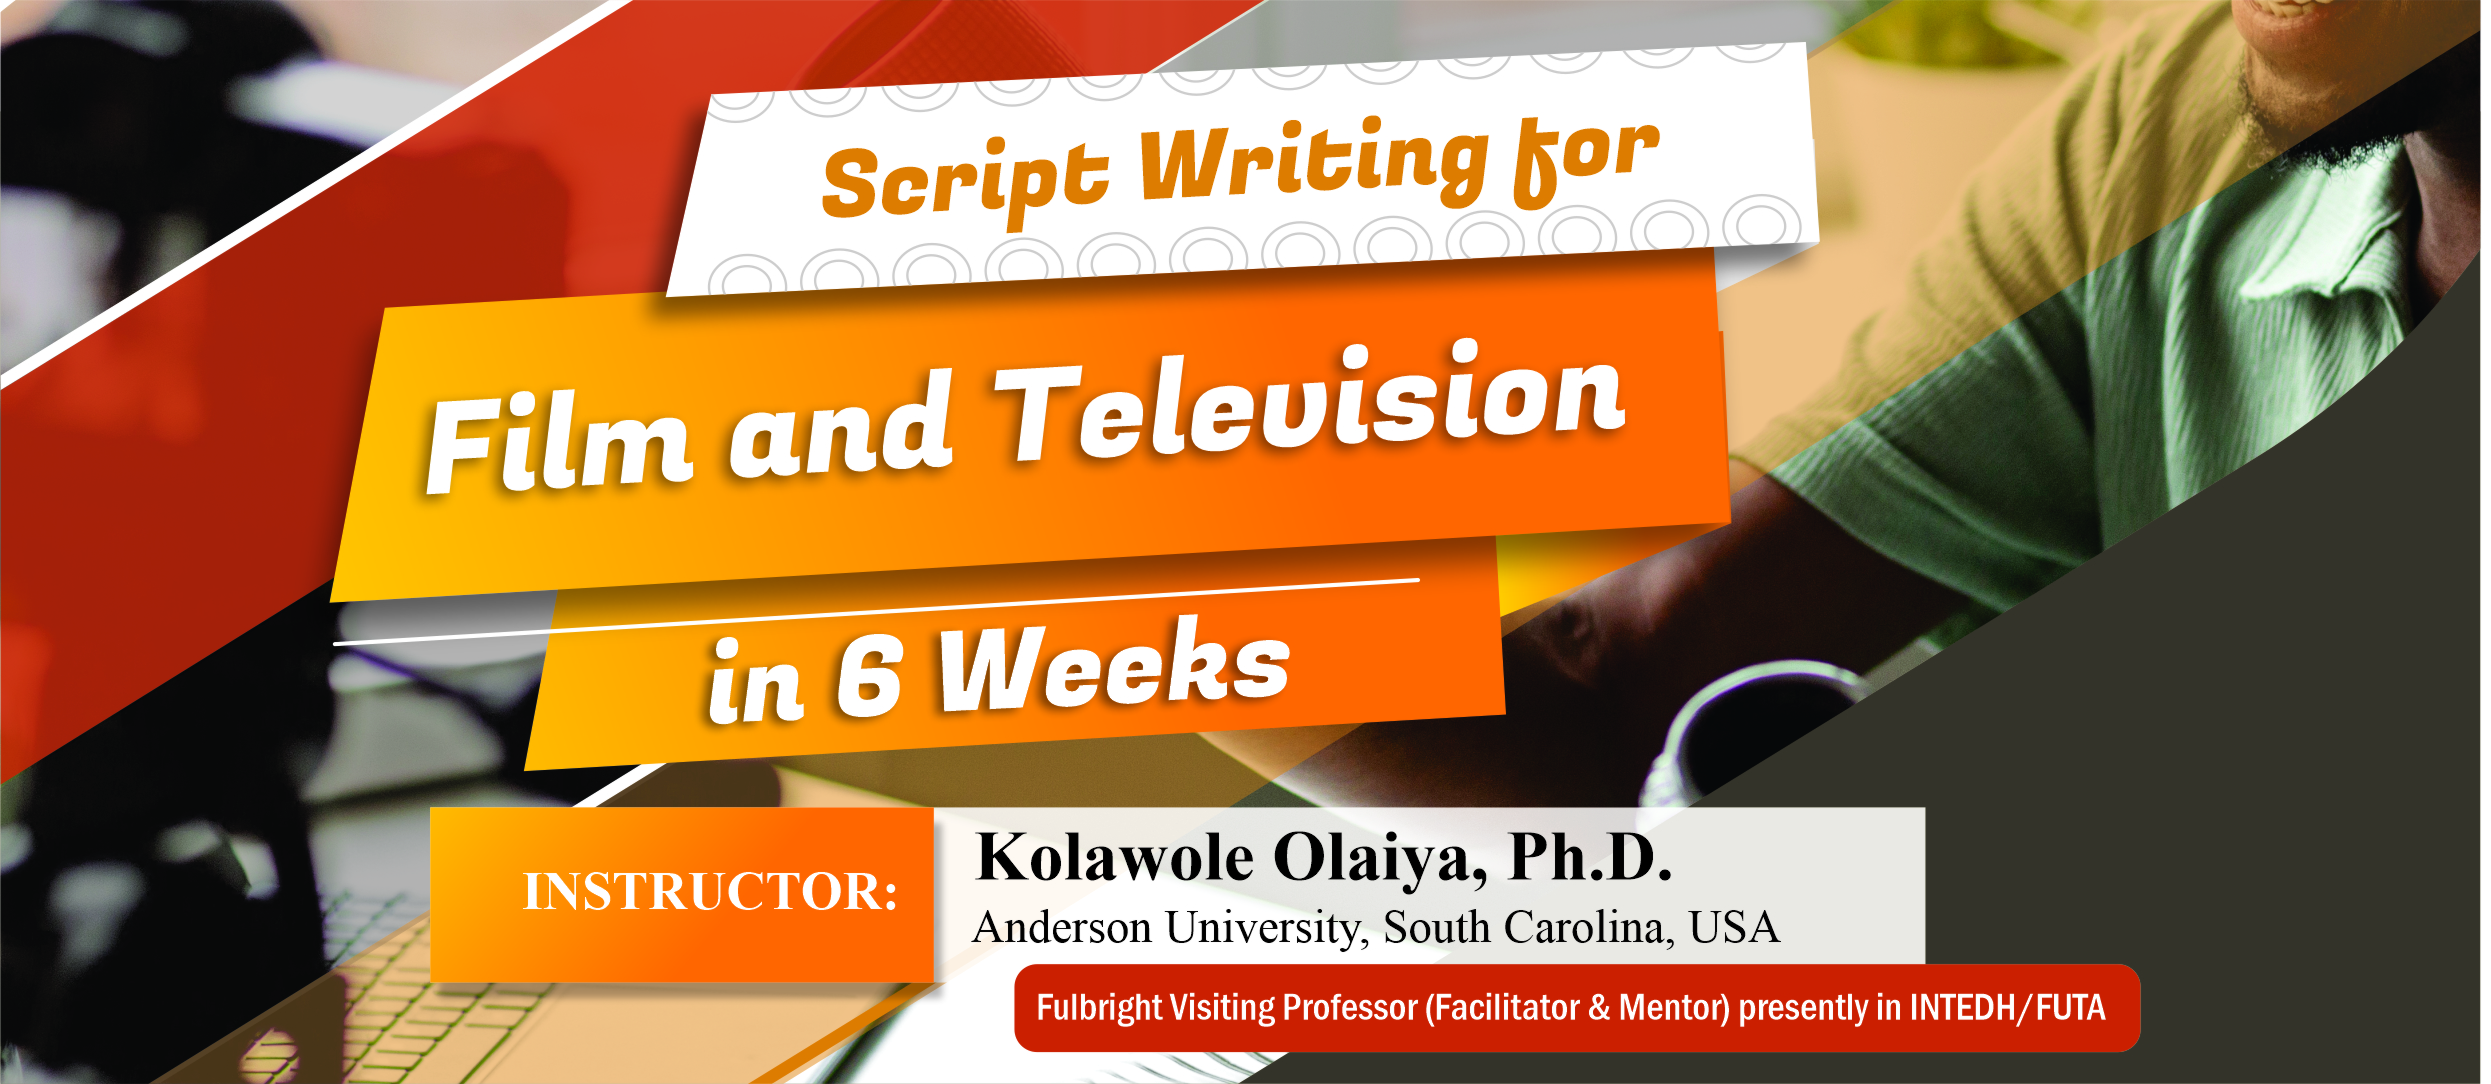 Script writing for Films and Television